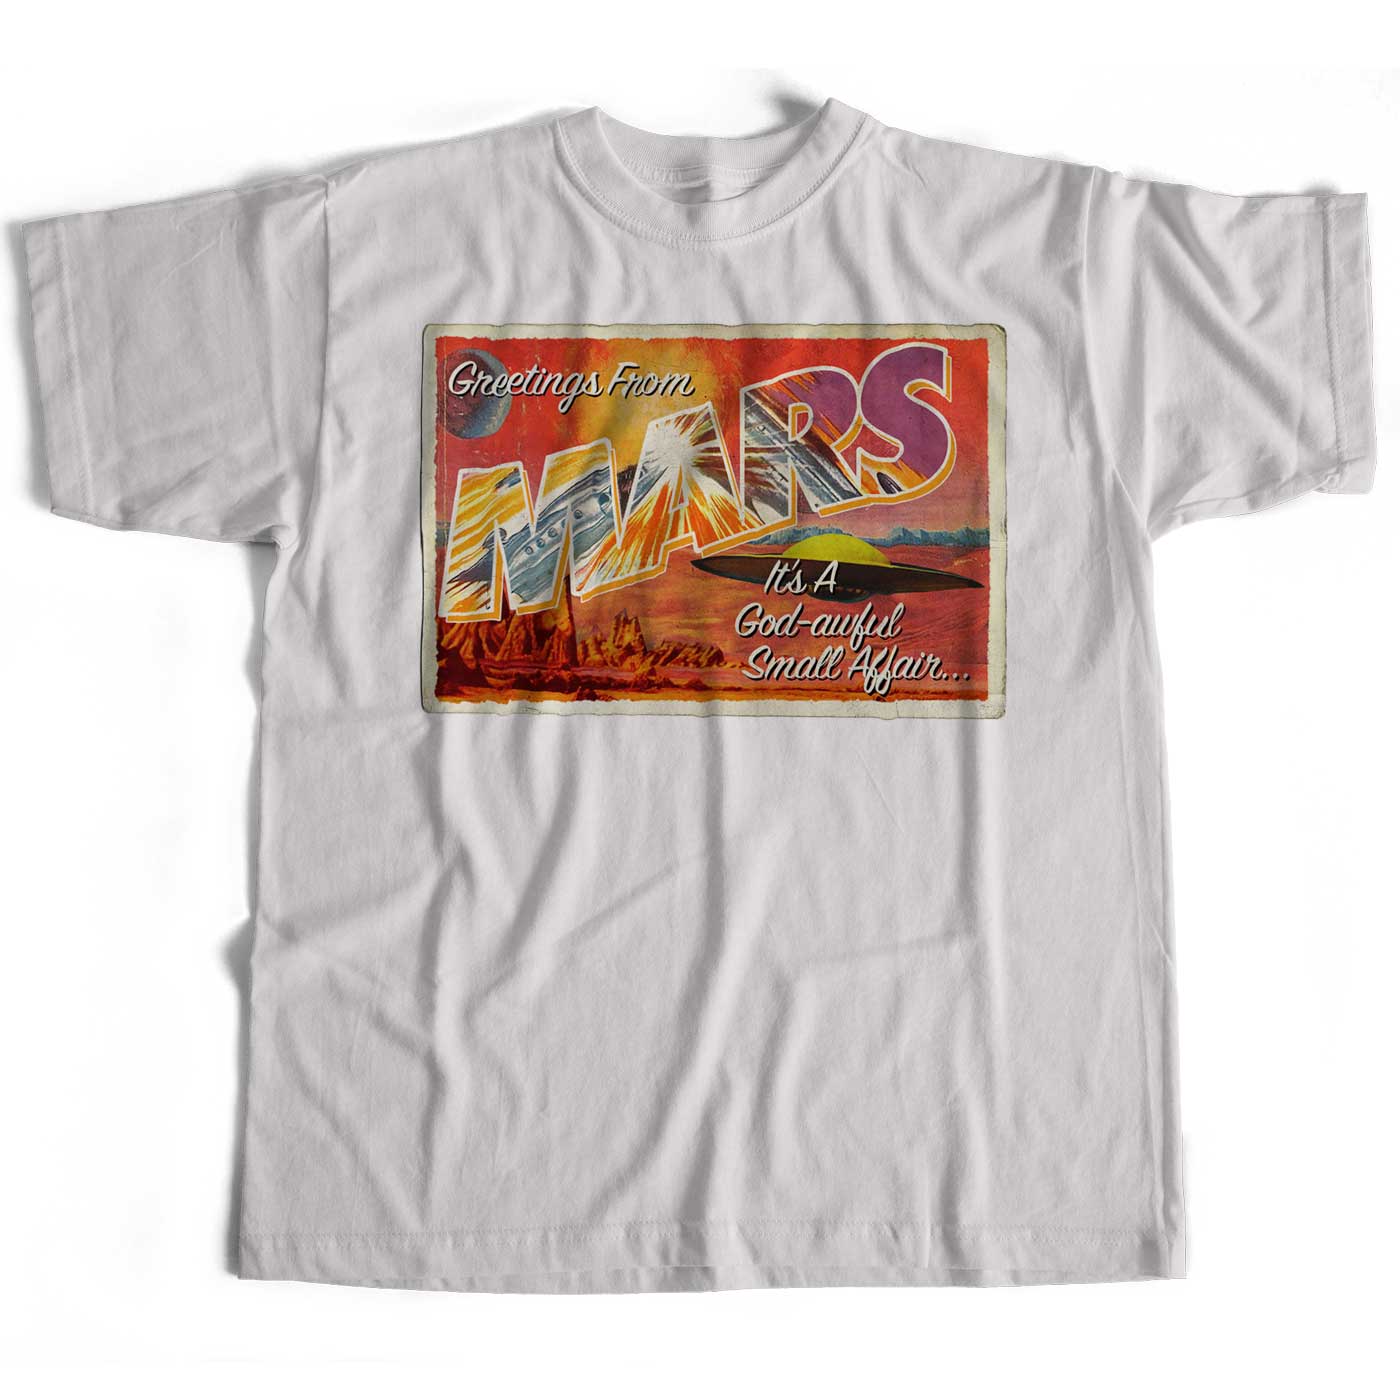 Greetings From Mars T Shirt - It's A Godawful Small Affair An Old Skool Hooligans Rock Postcard